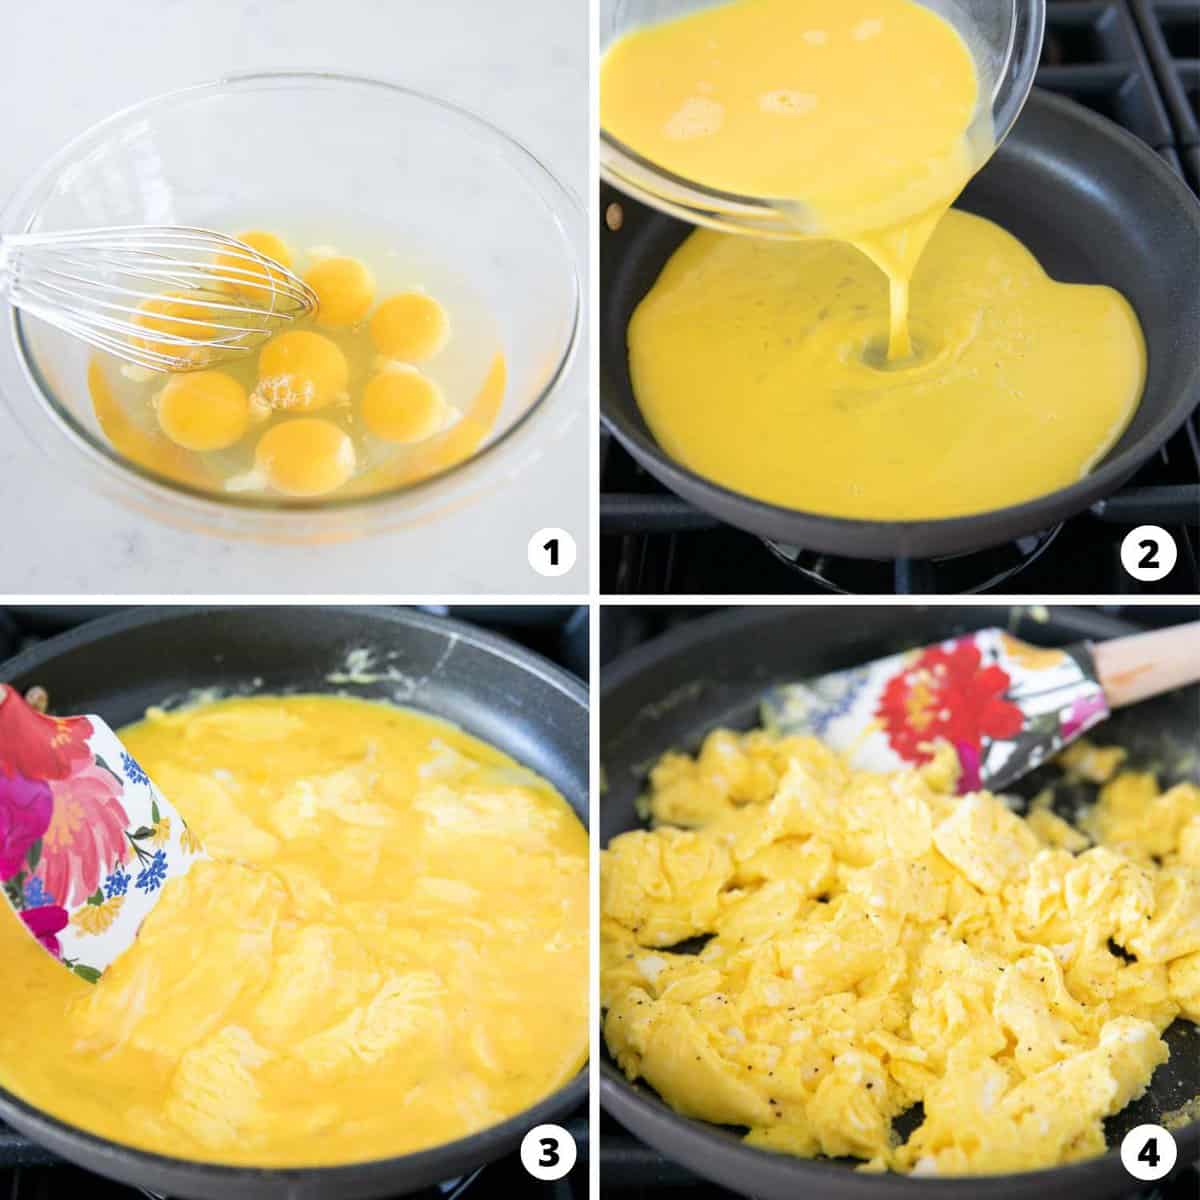 Showing how to make scrambled egg in a 4 step collage.